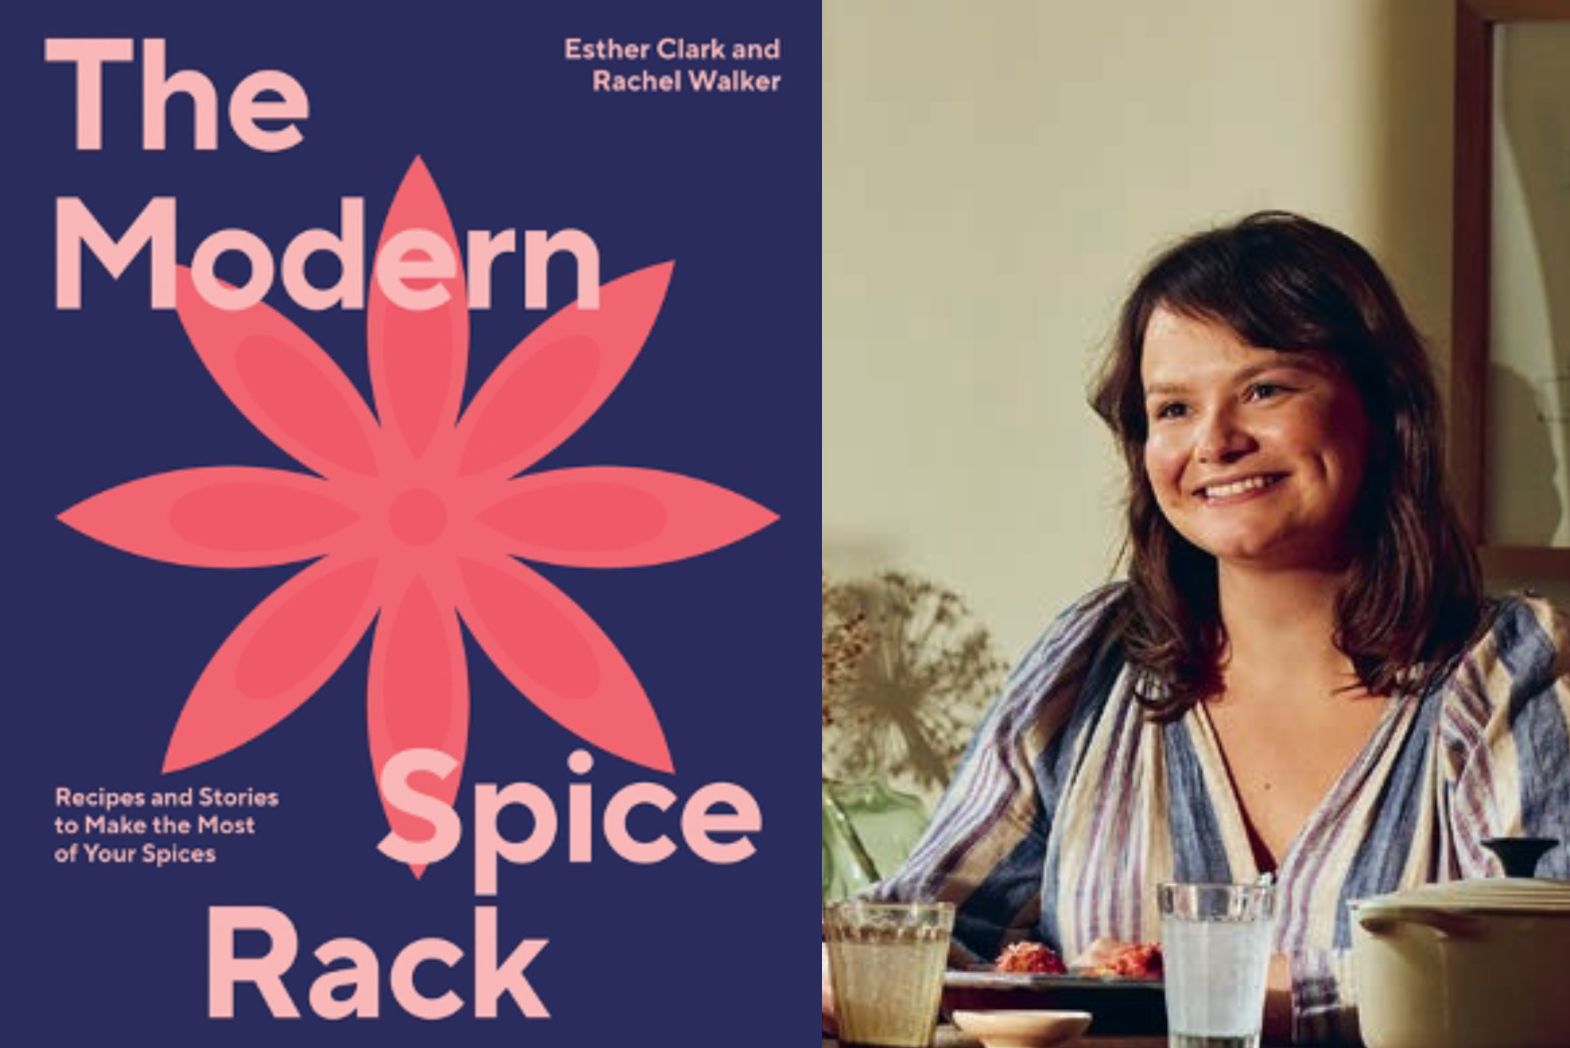 Esther Clark and The Modern Spice Rack